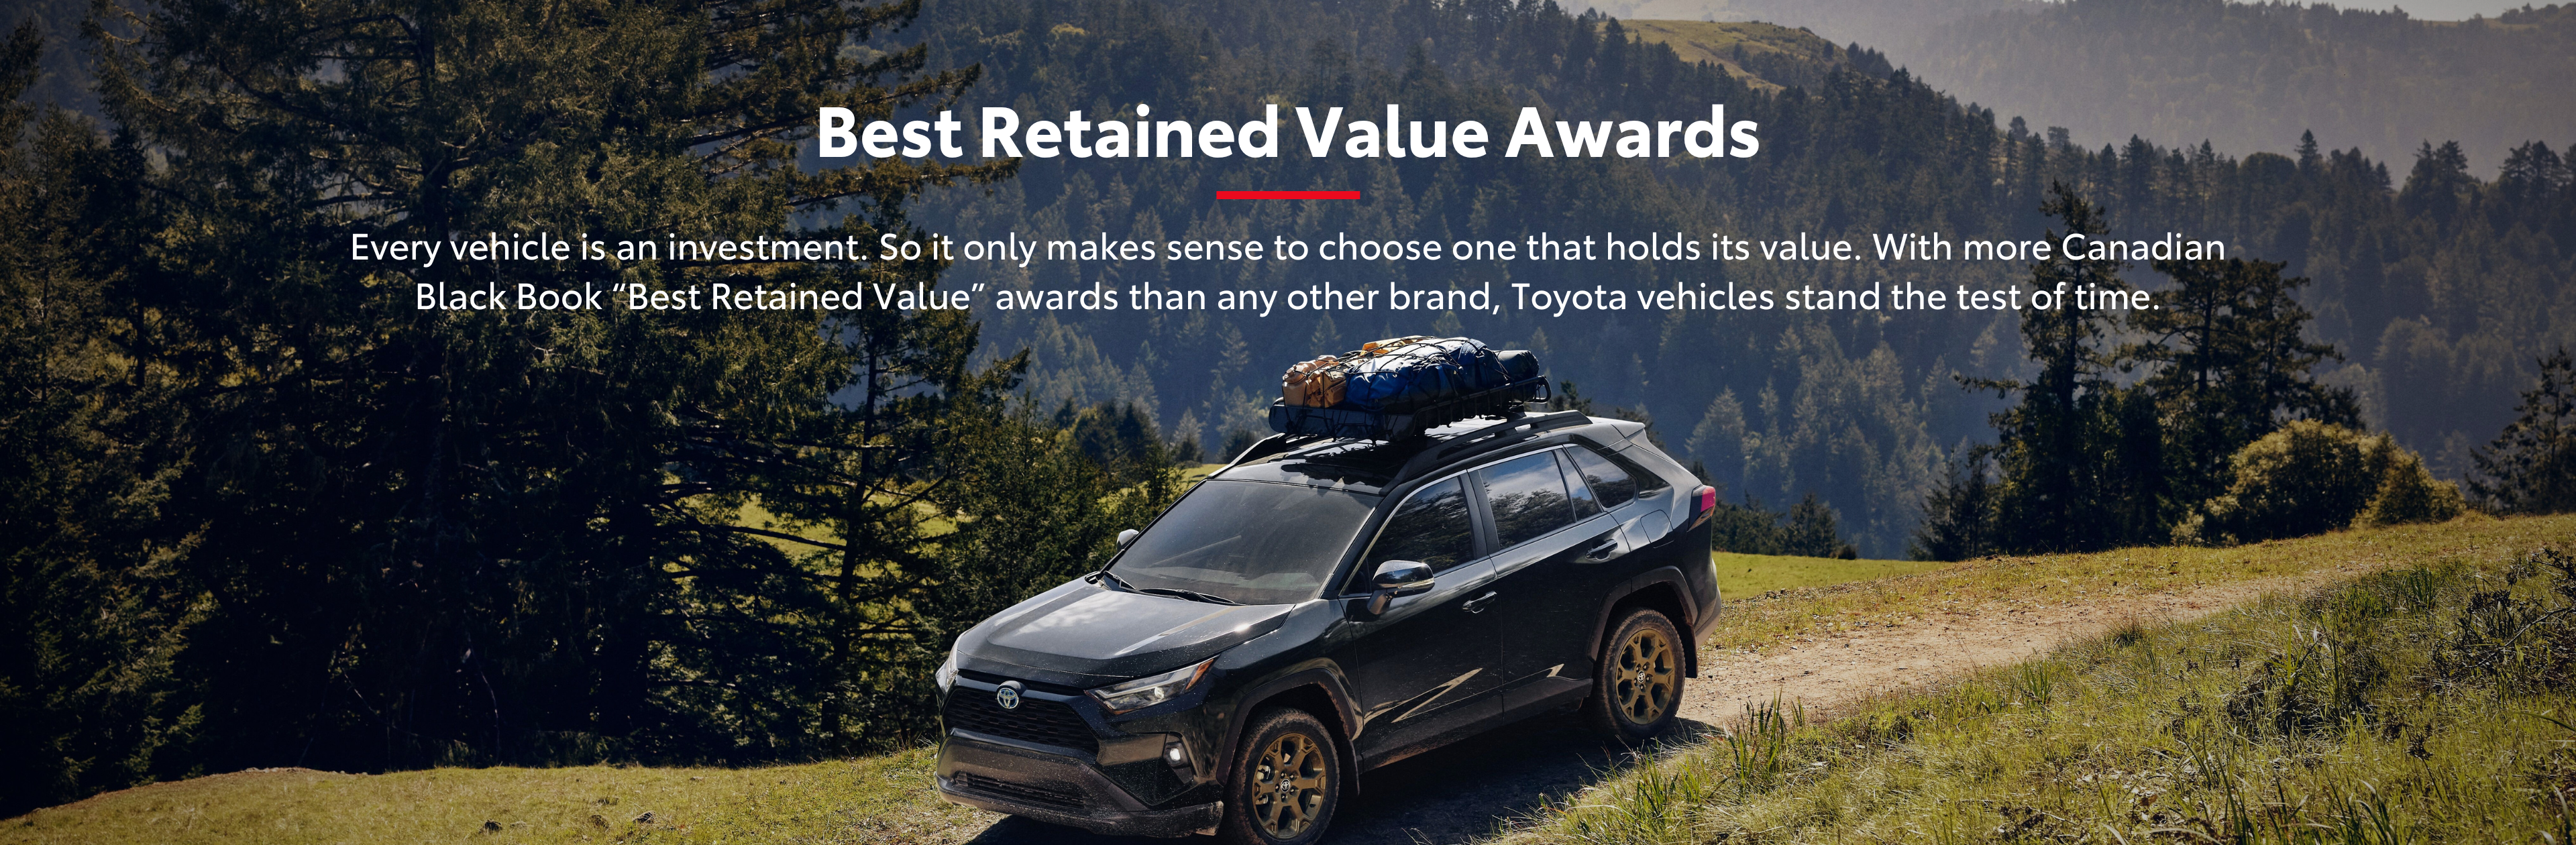 An image of a Toyota on top of a mountain or hill with lots of trees in the back